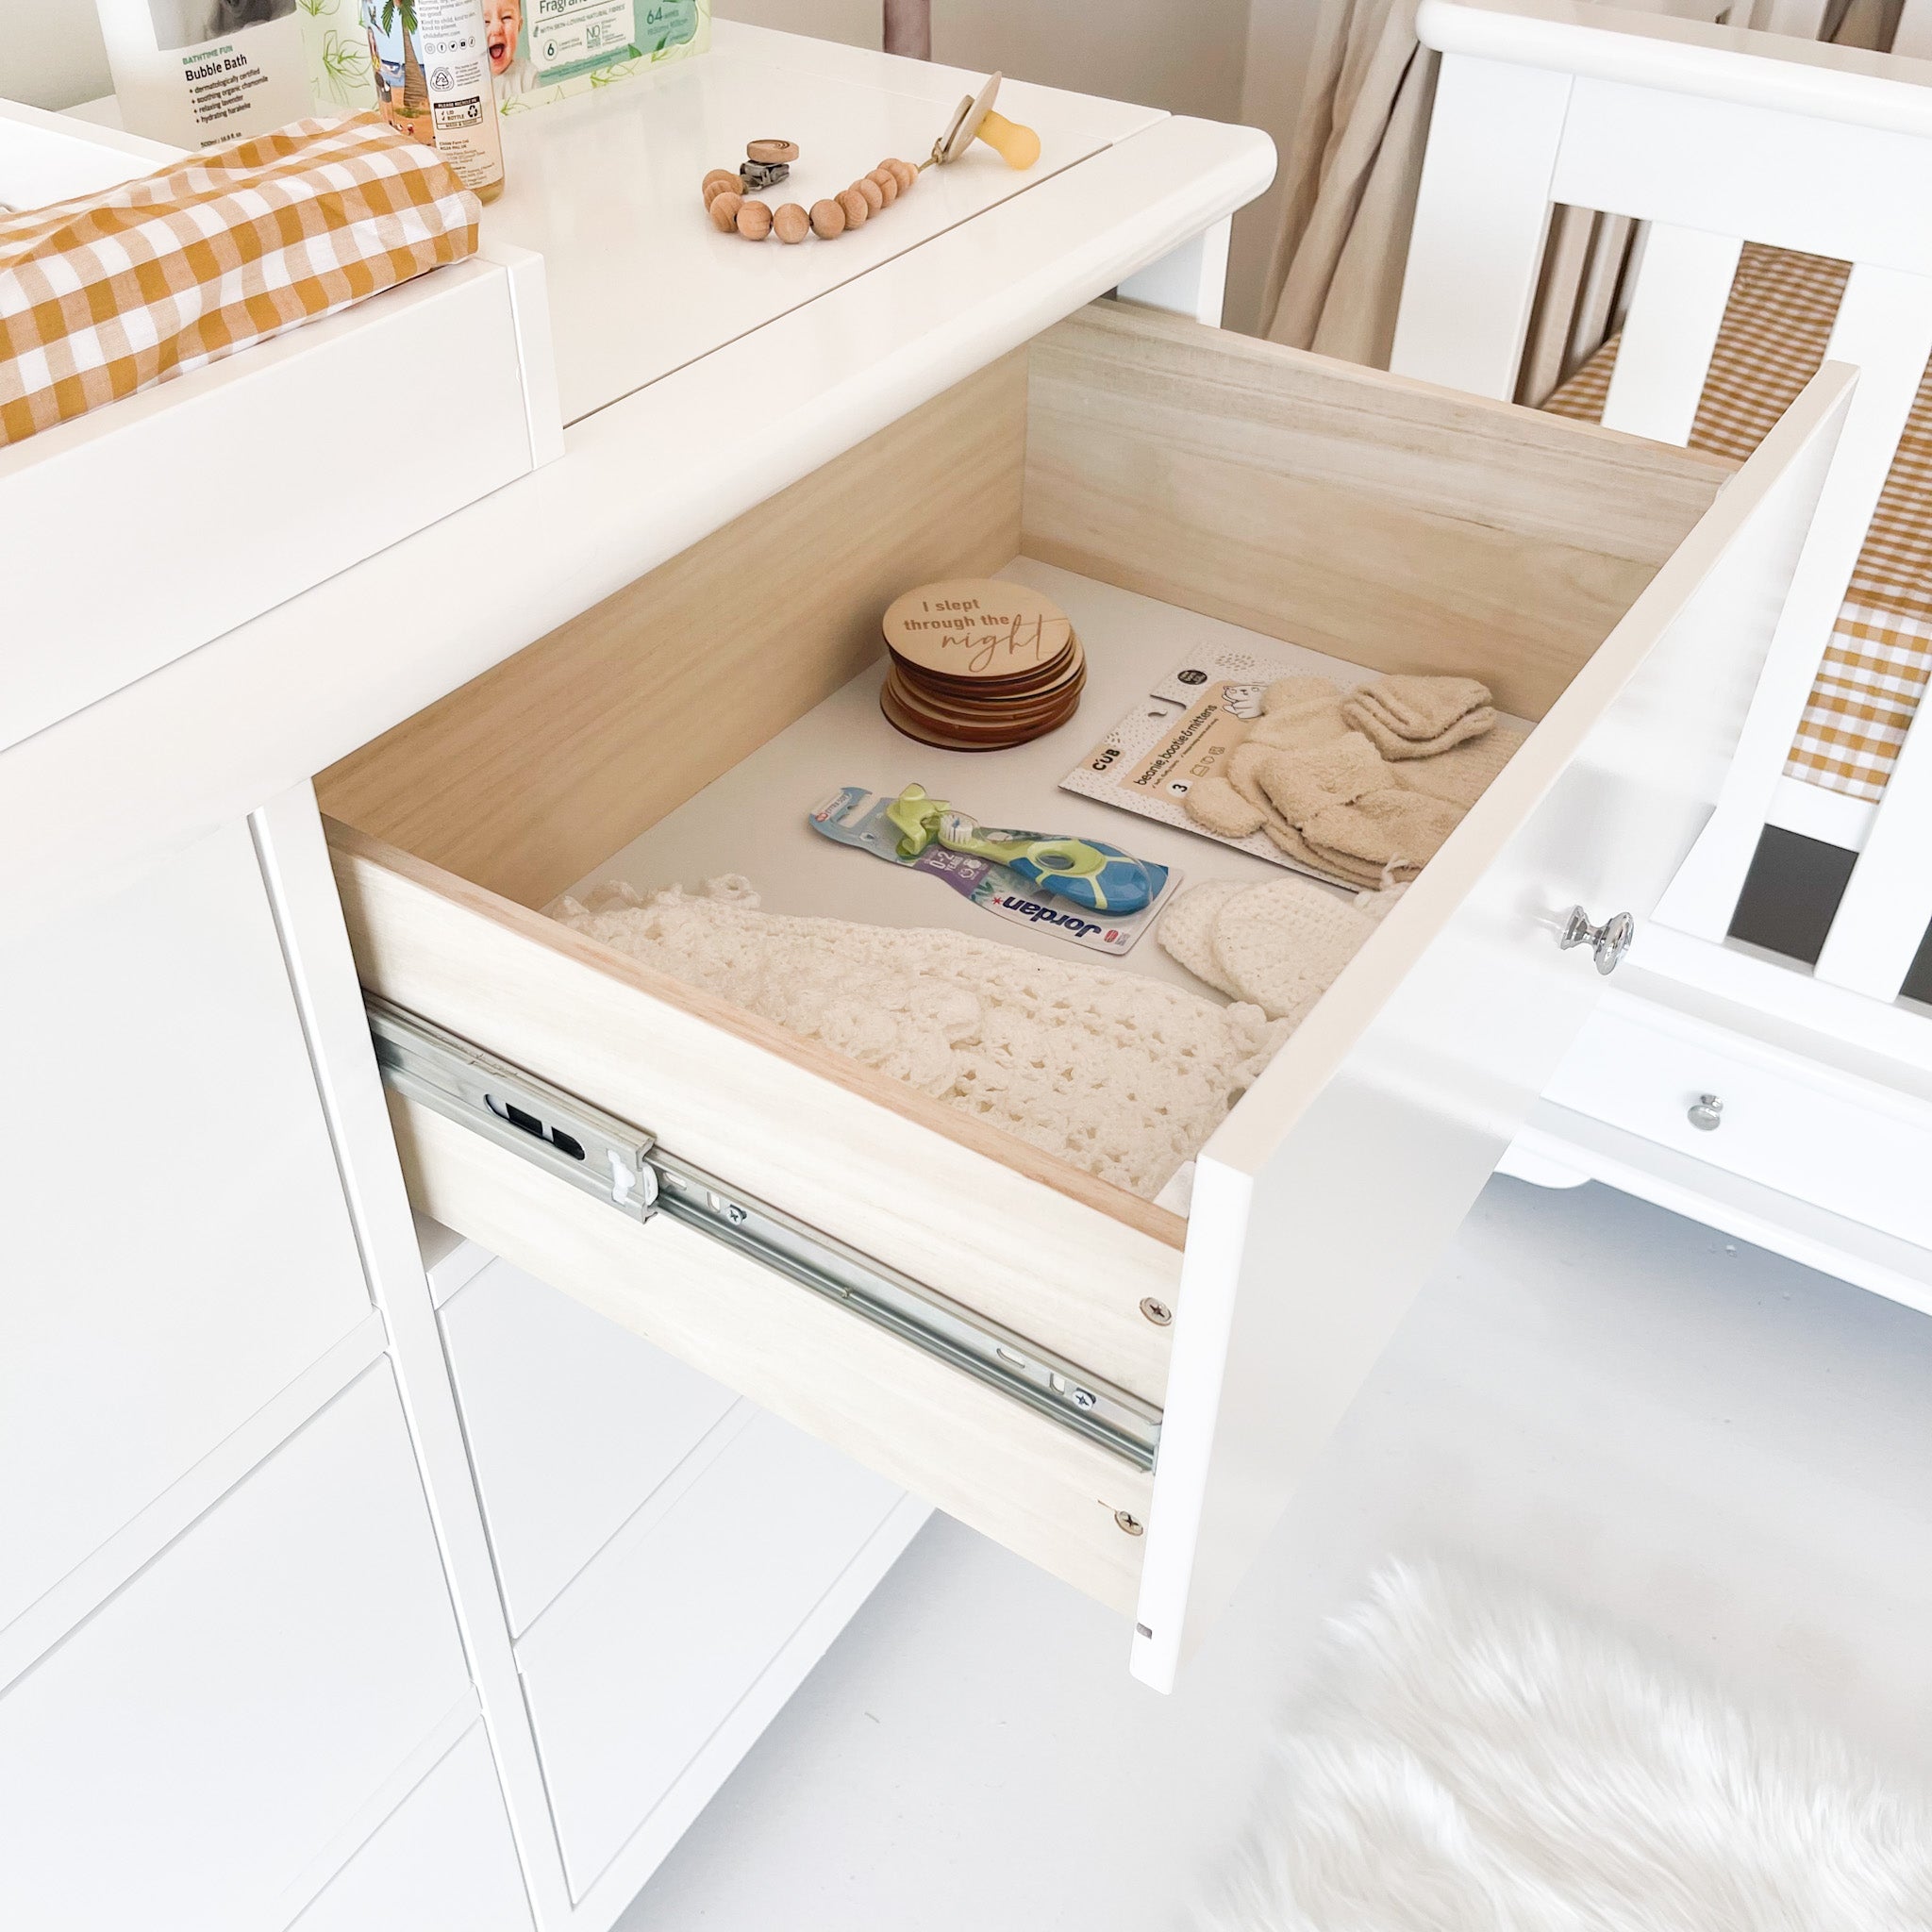 Contemporary Cot with 6 Drawer Chest and Bedside Bassinet